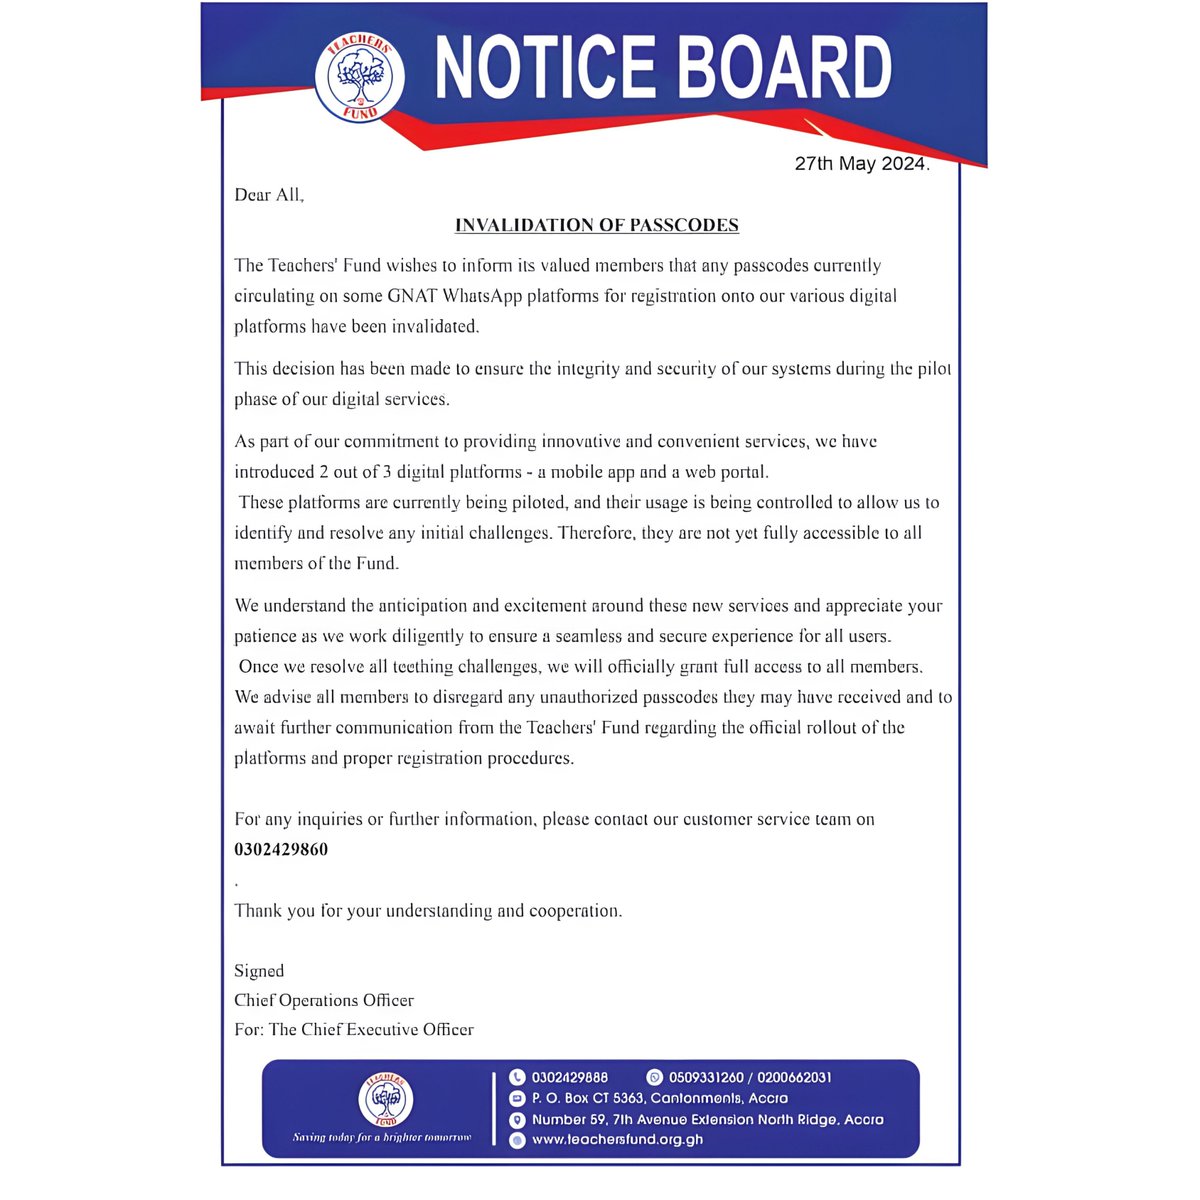 An Important Notice To All Members.
#TeachersFund
#Notice